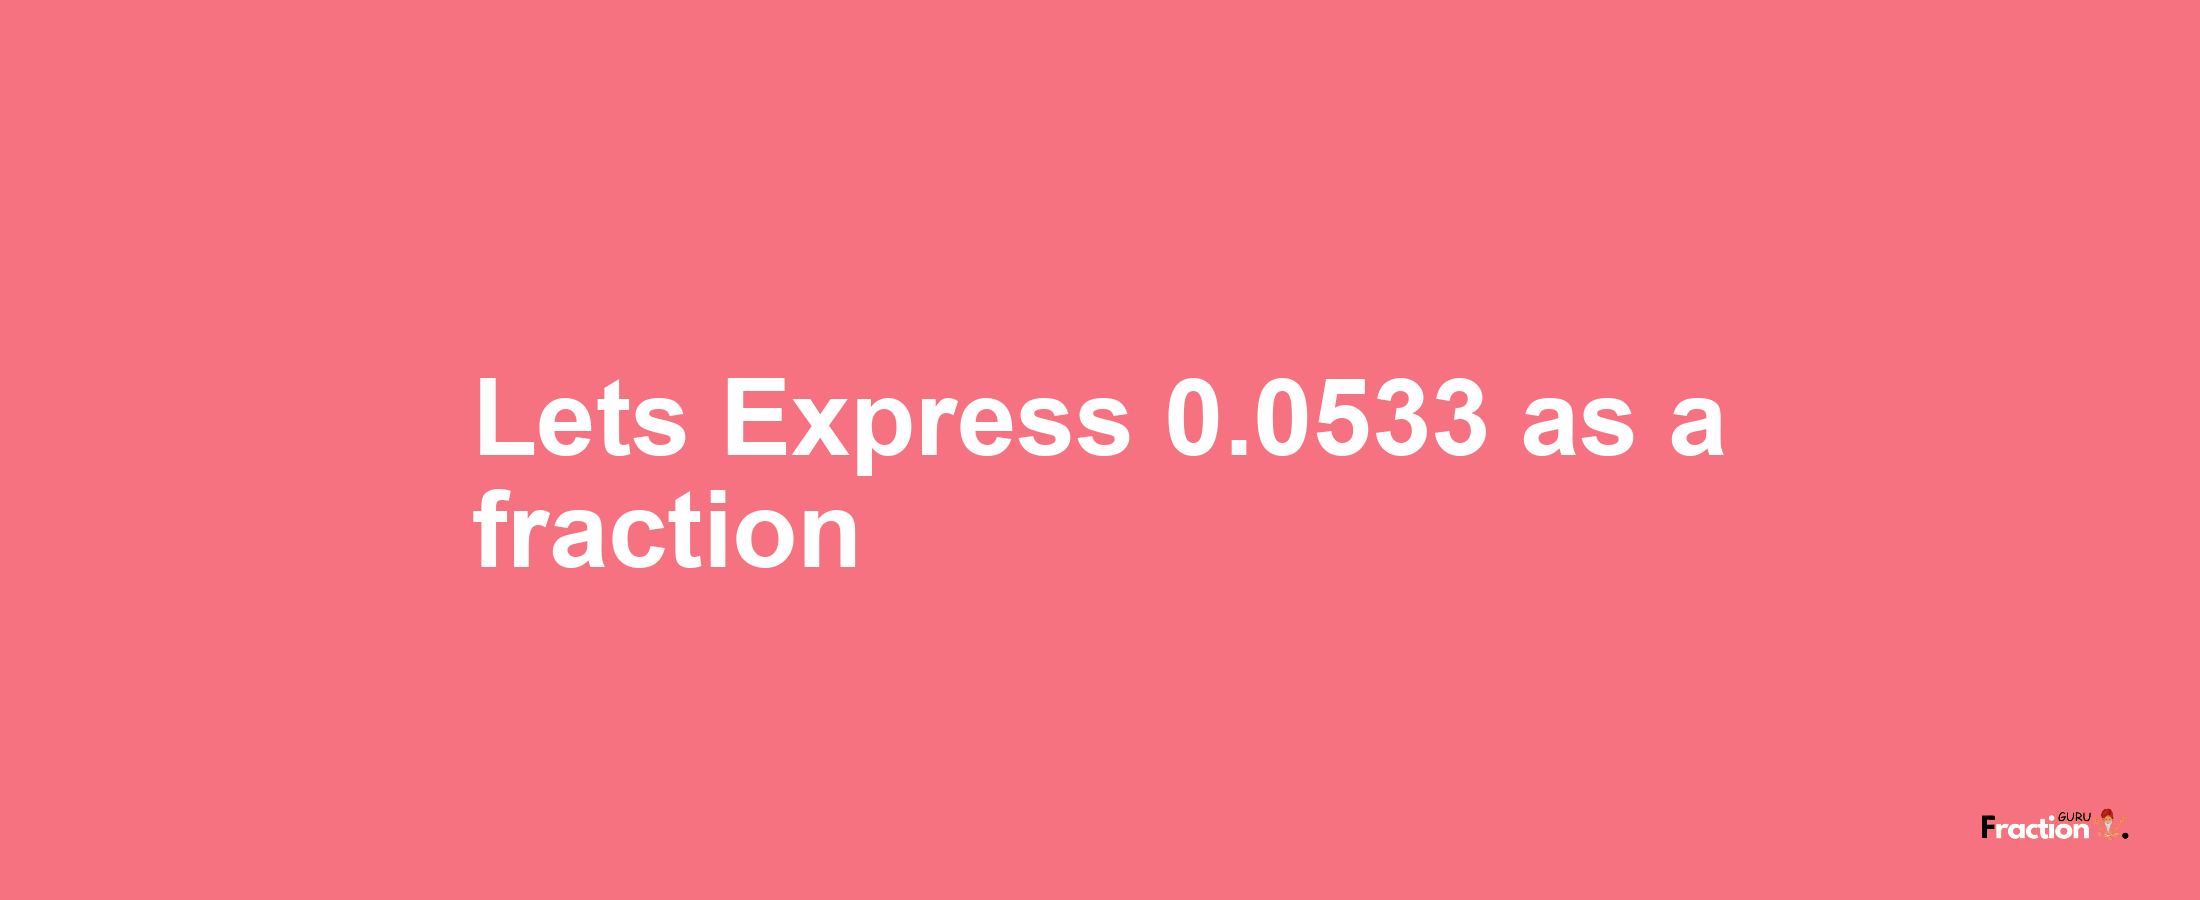 Lets Express 0.0533 as afraction